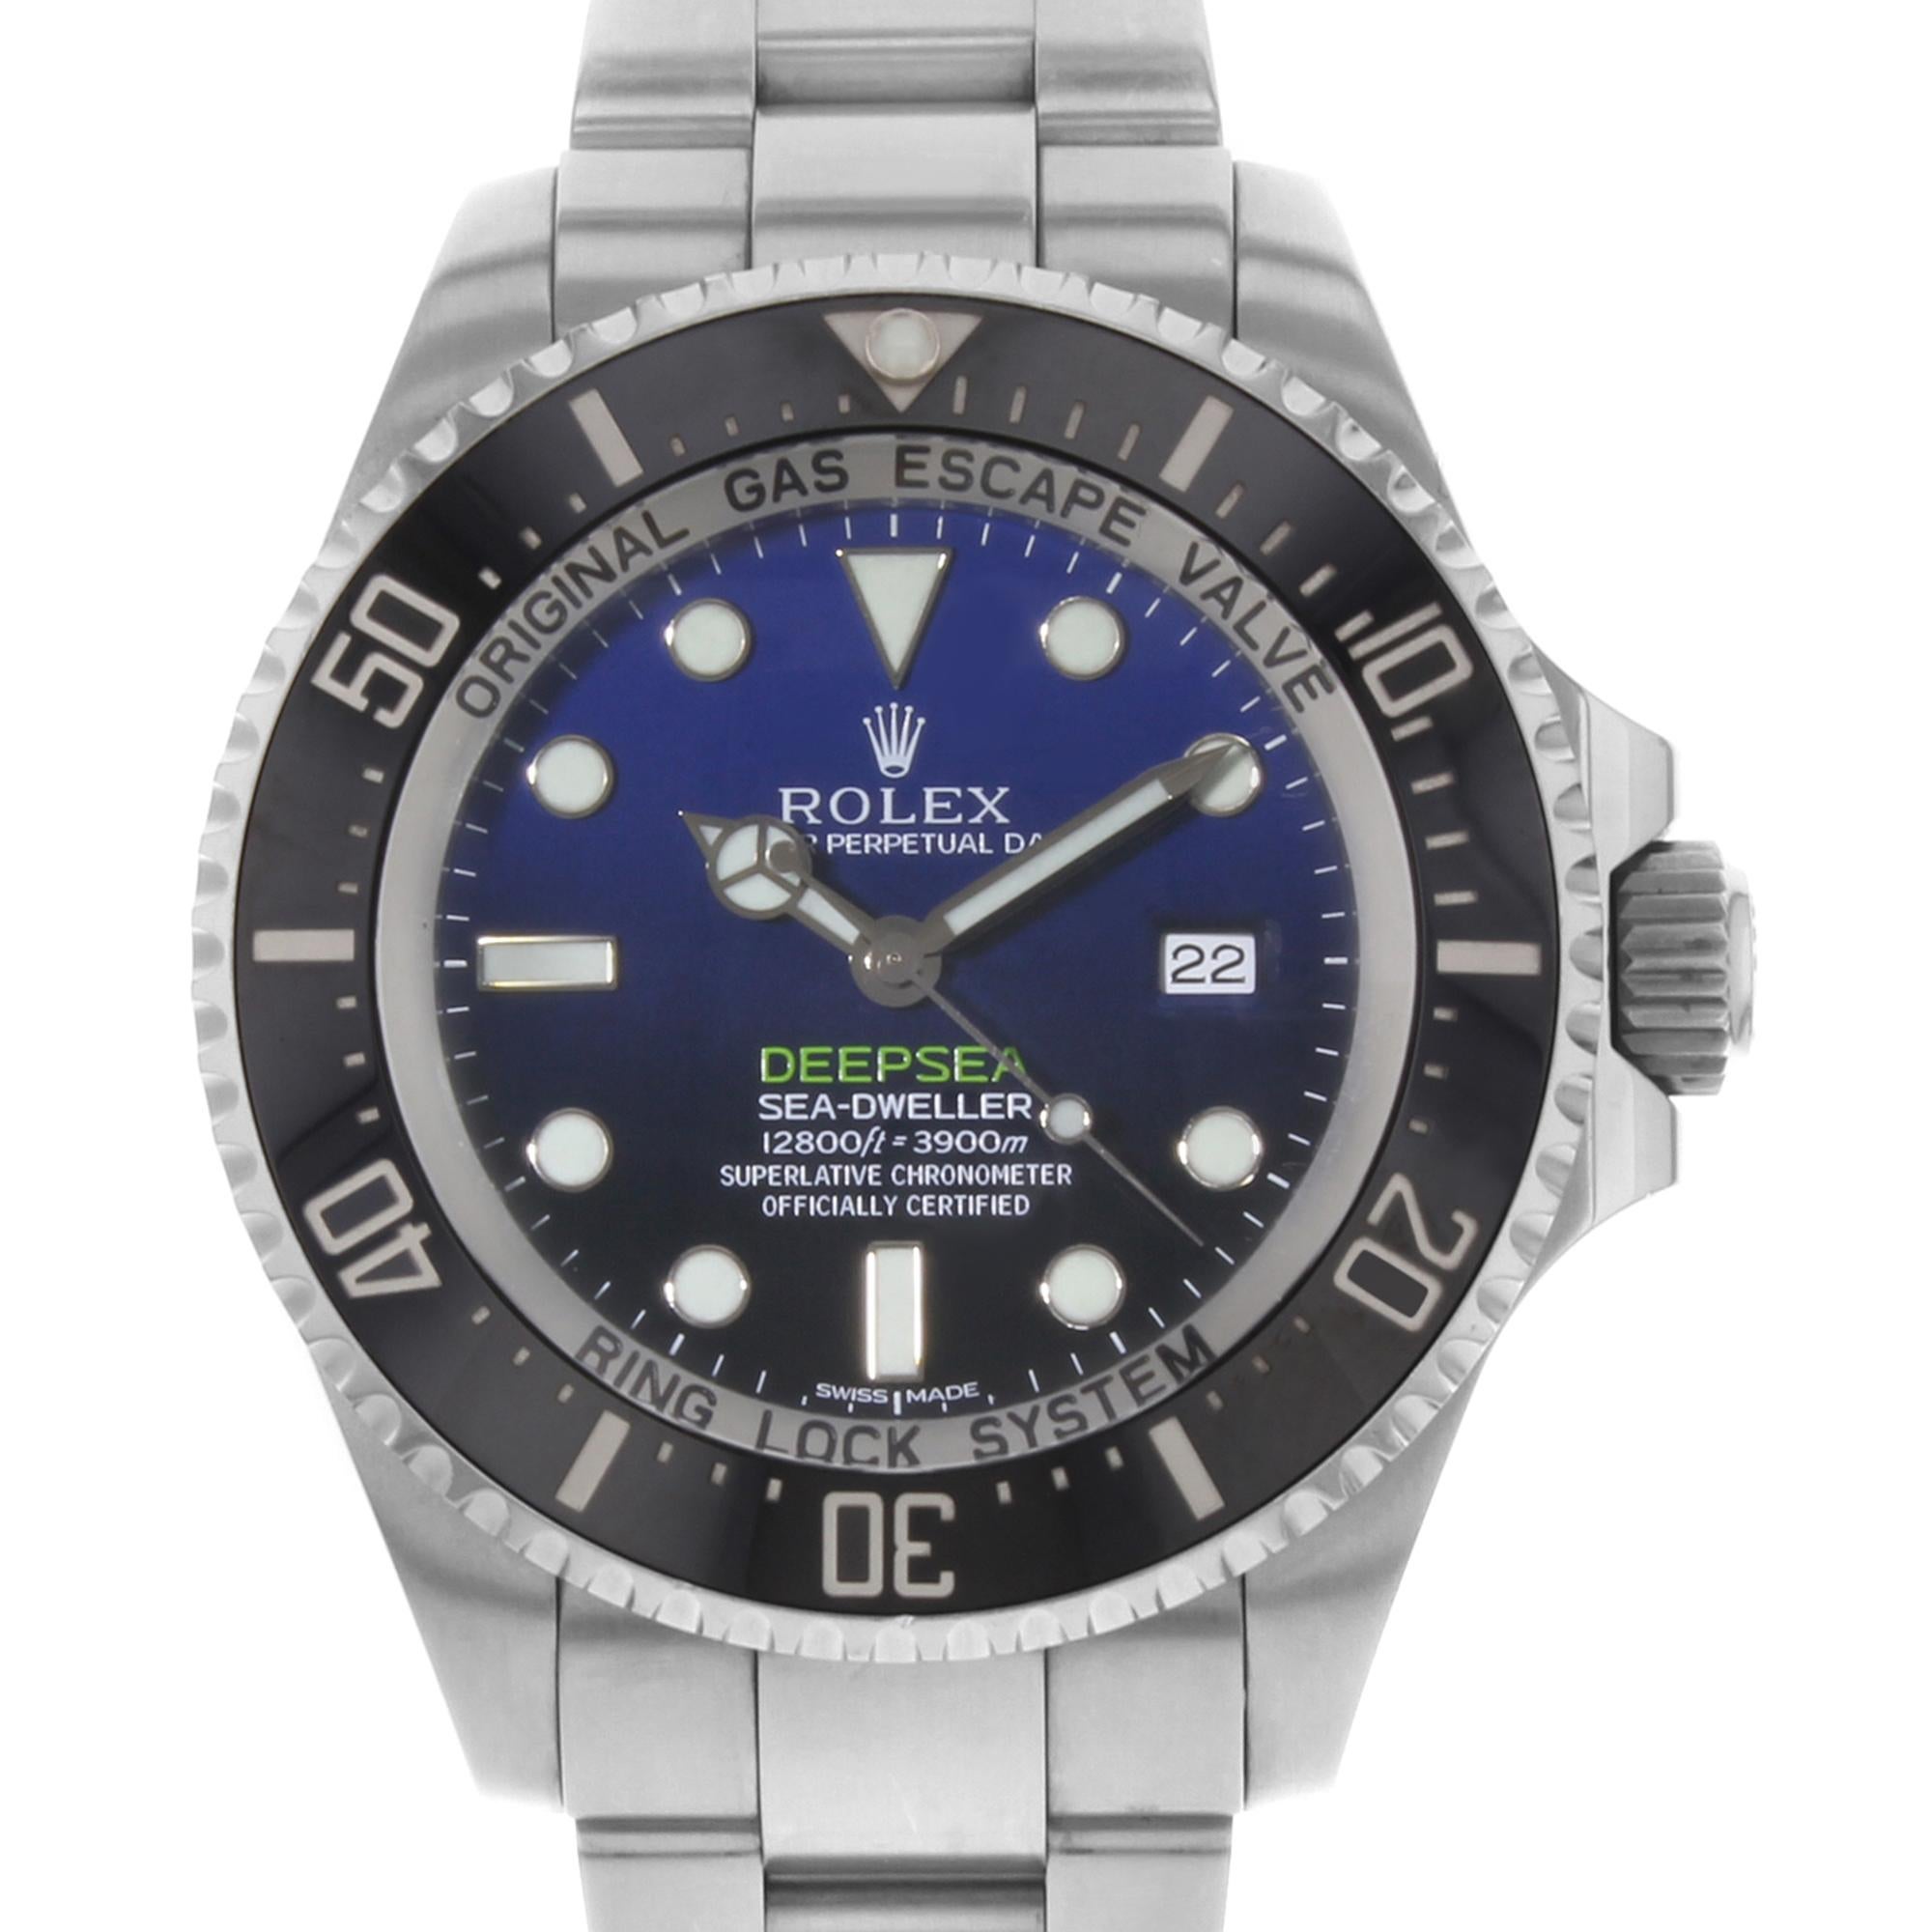 This pre-owned Rolex Sea-Dweller 116660  is a beautiful men's timepiece that is powered by a mechanical (automatic) movement which is cased in a stainless steel case. It has a round shape face, date indicator dial, and has hand sticks & dots style